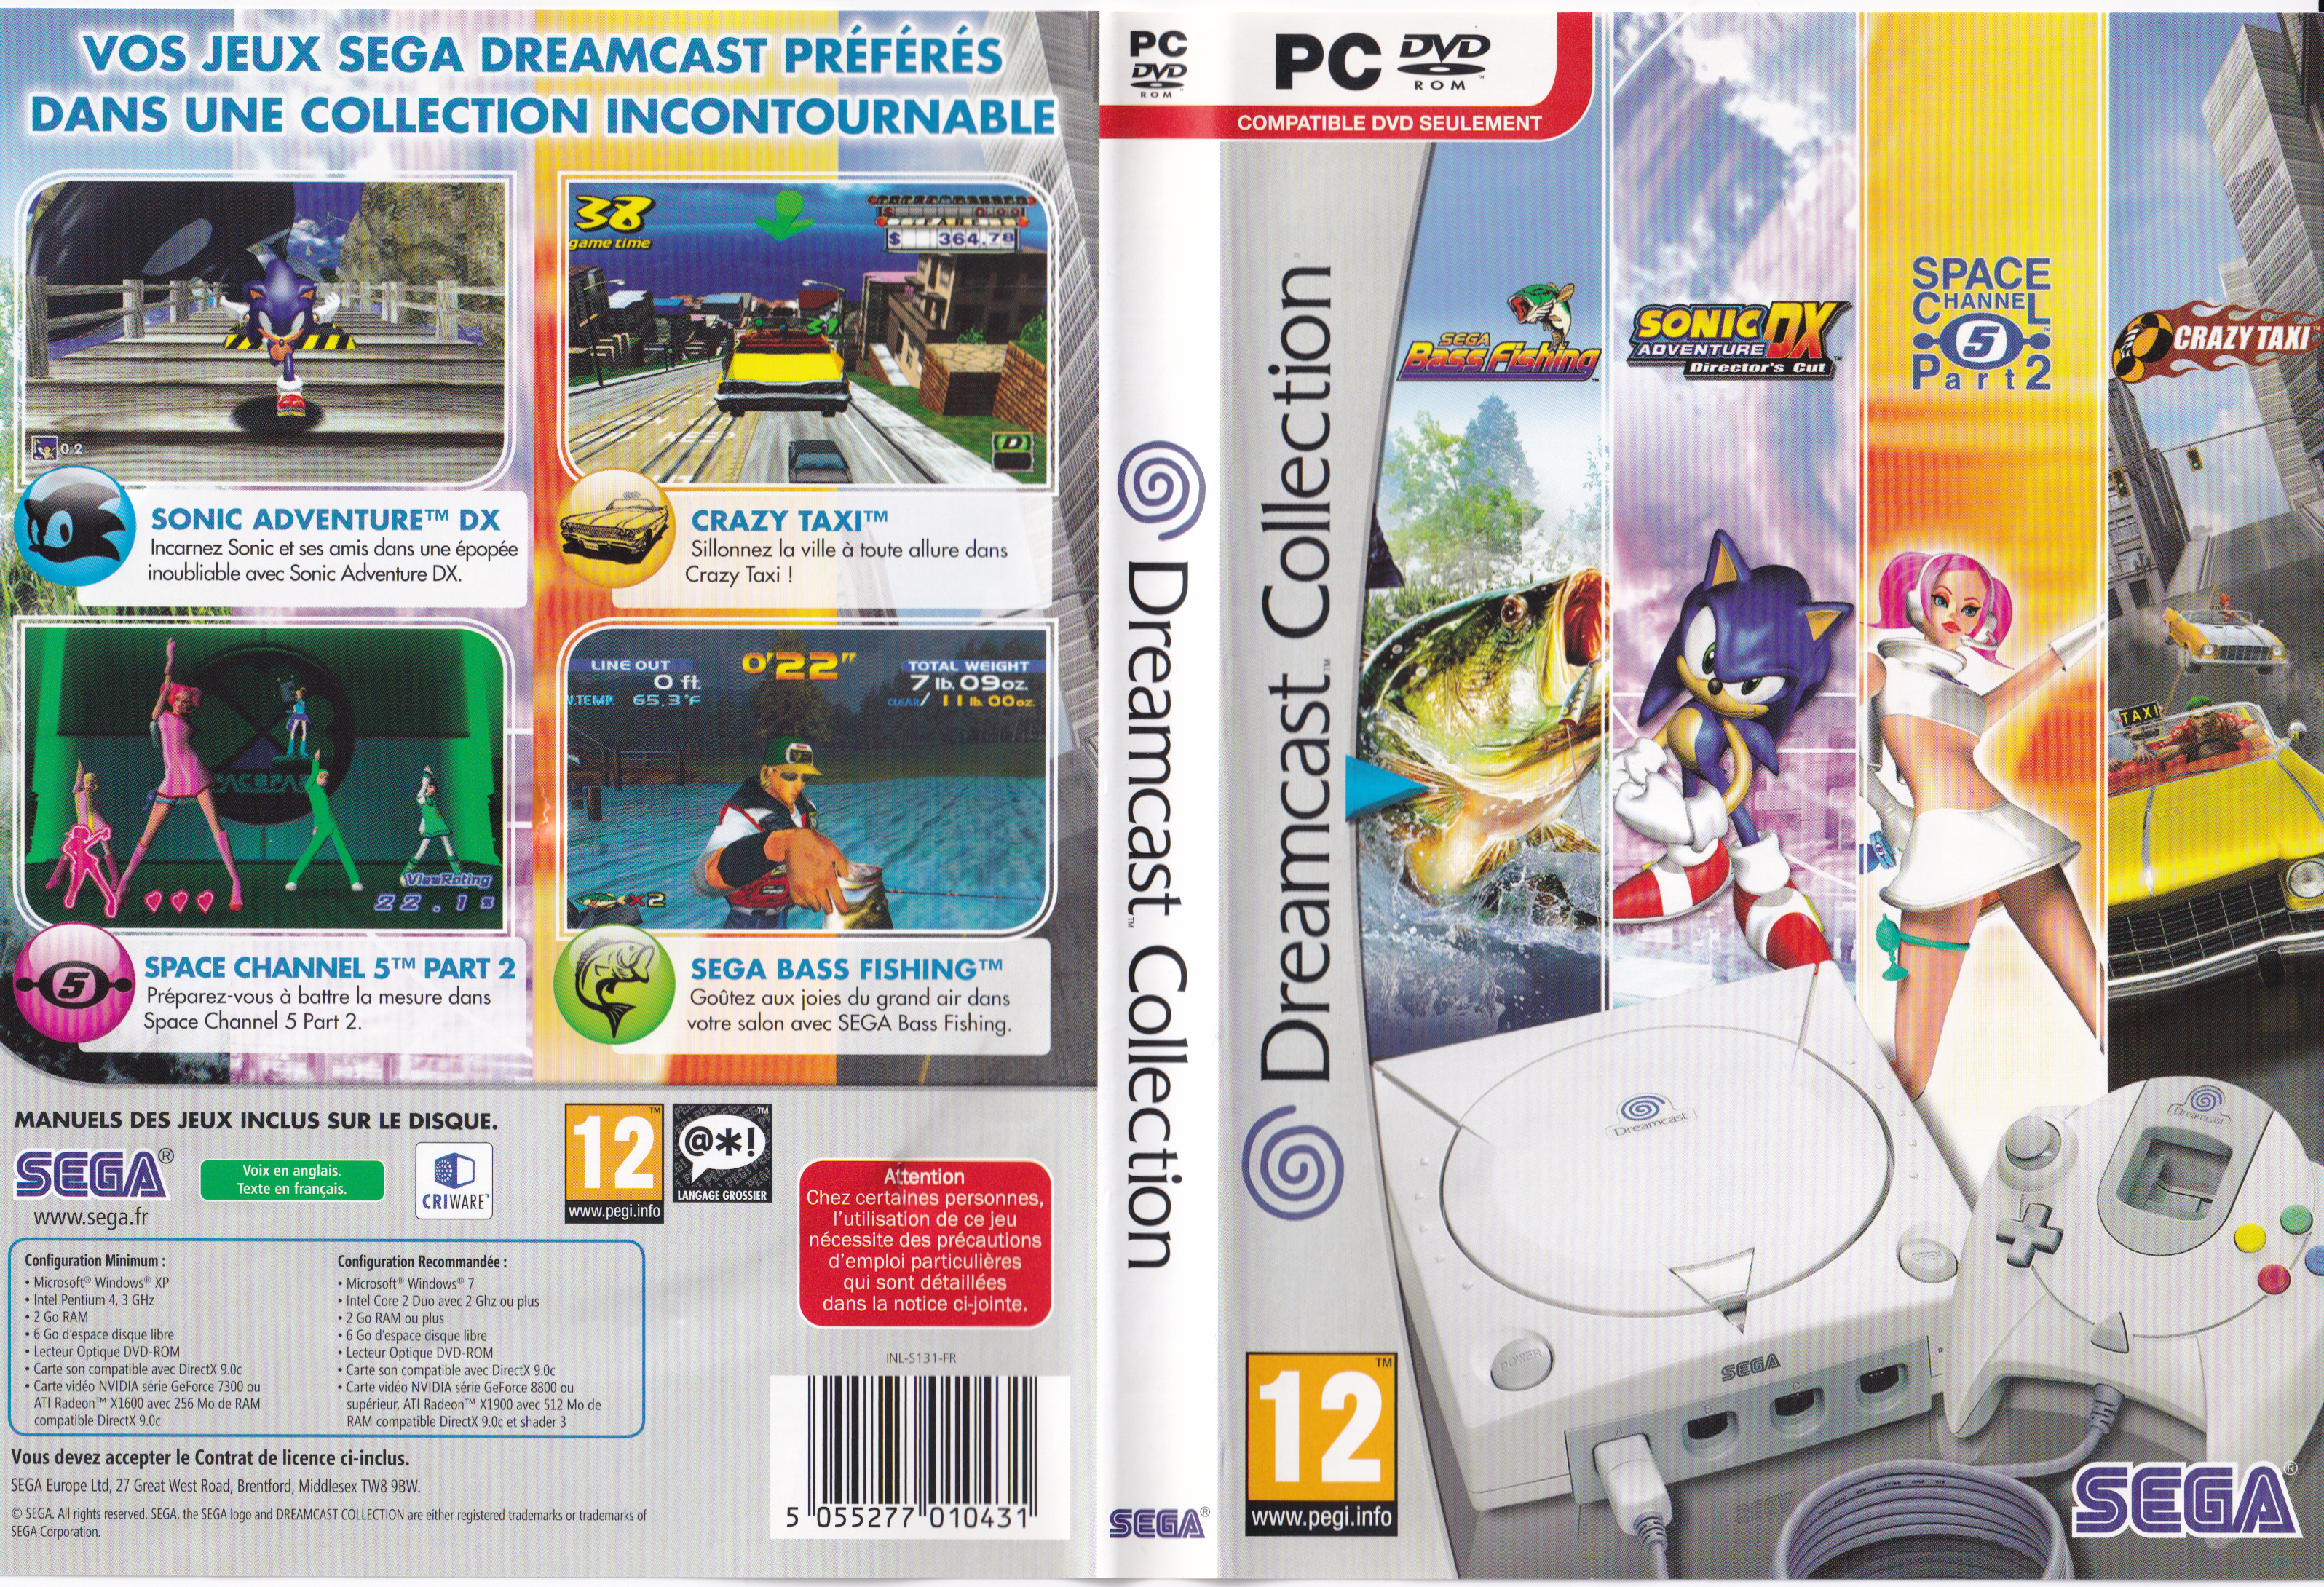 Dreamcast collection pc download drive download for windows